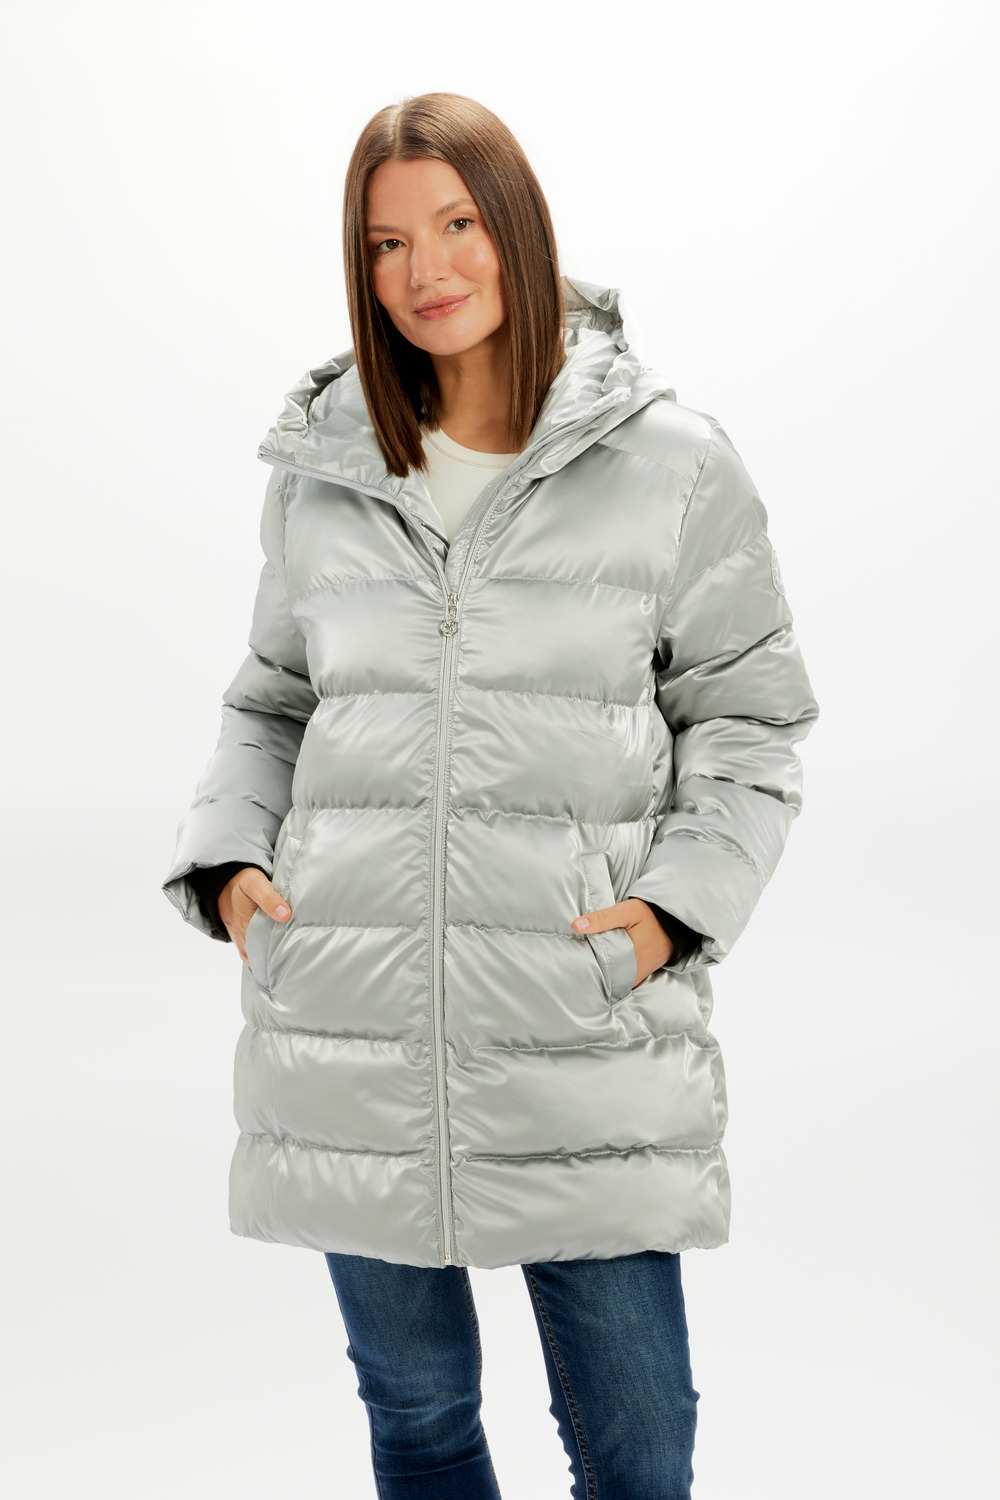 Shiny Puffer Coat Style 73810. Silver